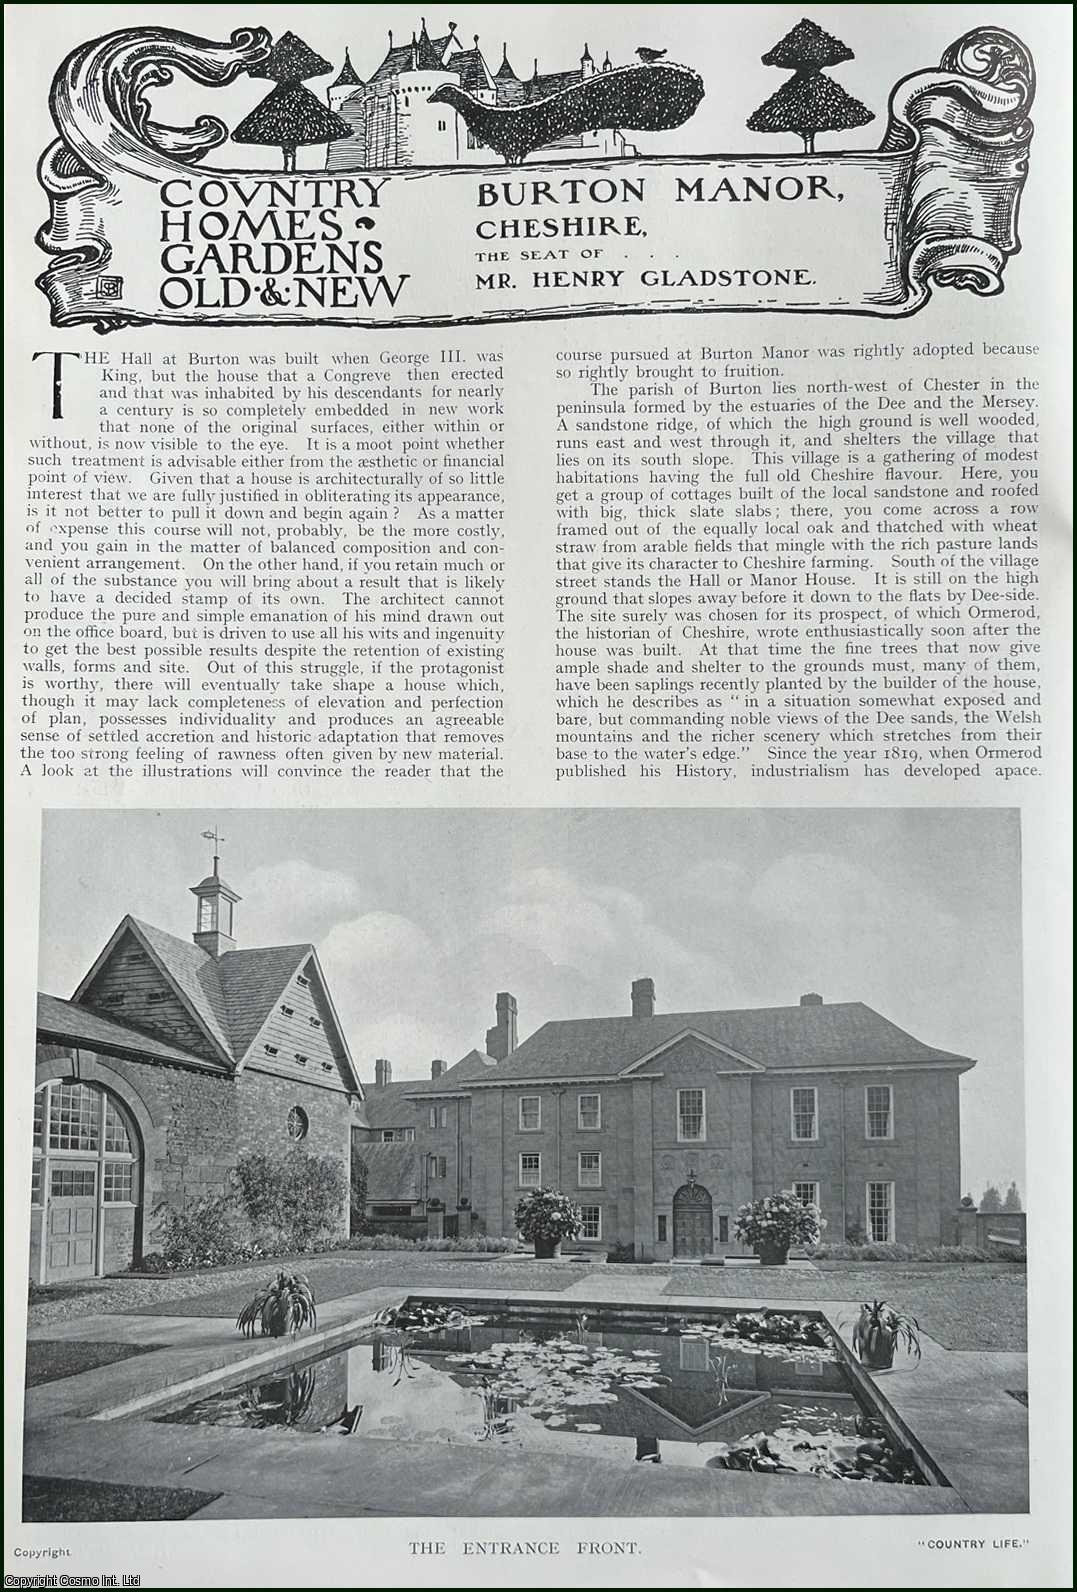 Country Life Magazine - Burton Manor, Cheshire. Several pictures and accompanying text, removed from an original issue of Country Life Magazine, 1912.